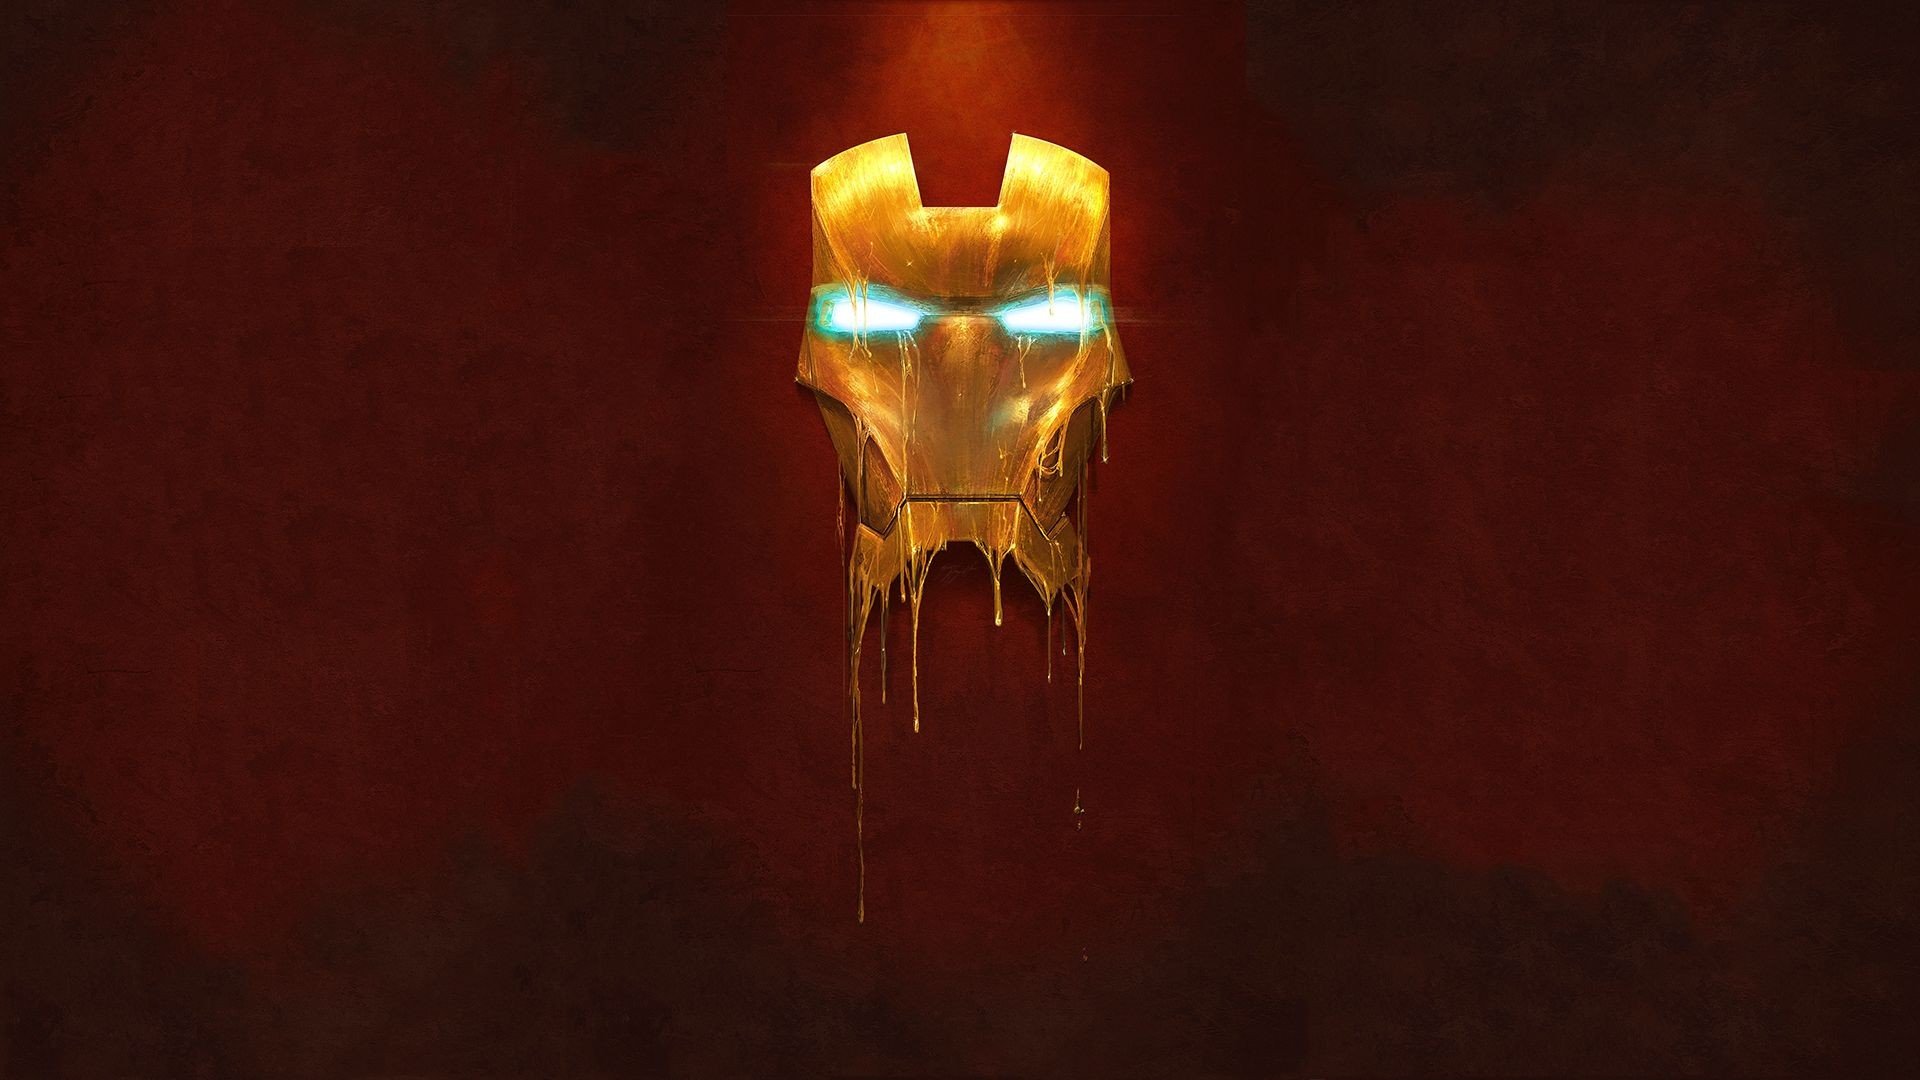  Man 3 in theaters Ive collected some awesome Iron Man wallpapers